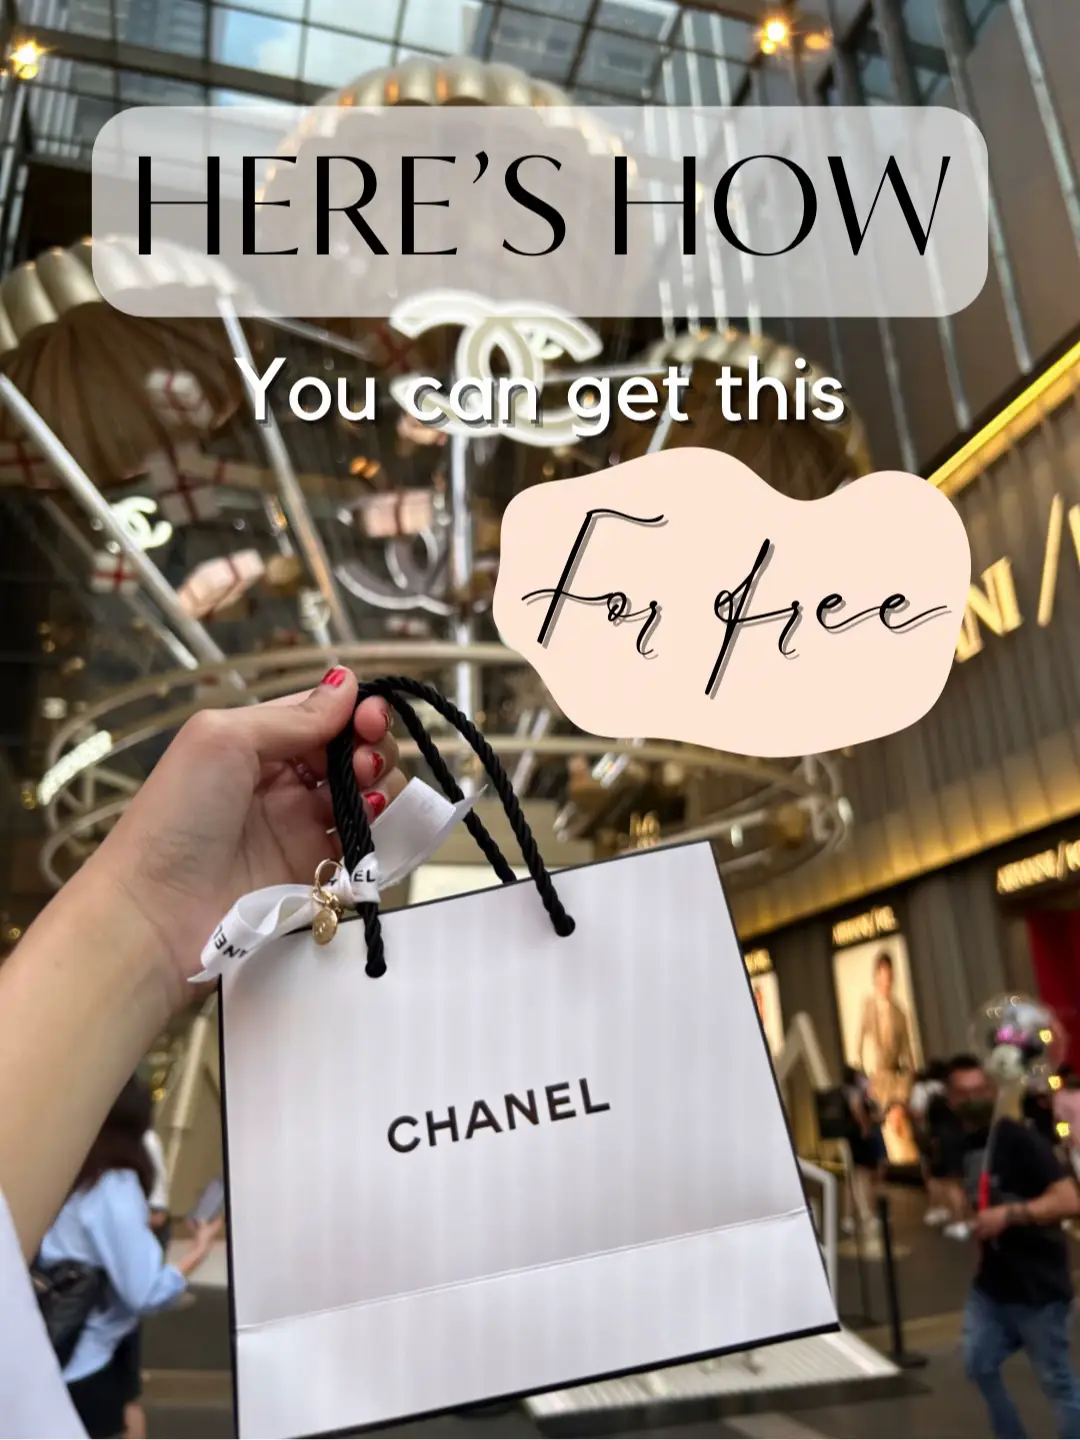 Chanel goodies, for free? Here's how!